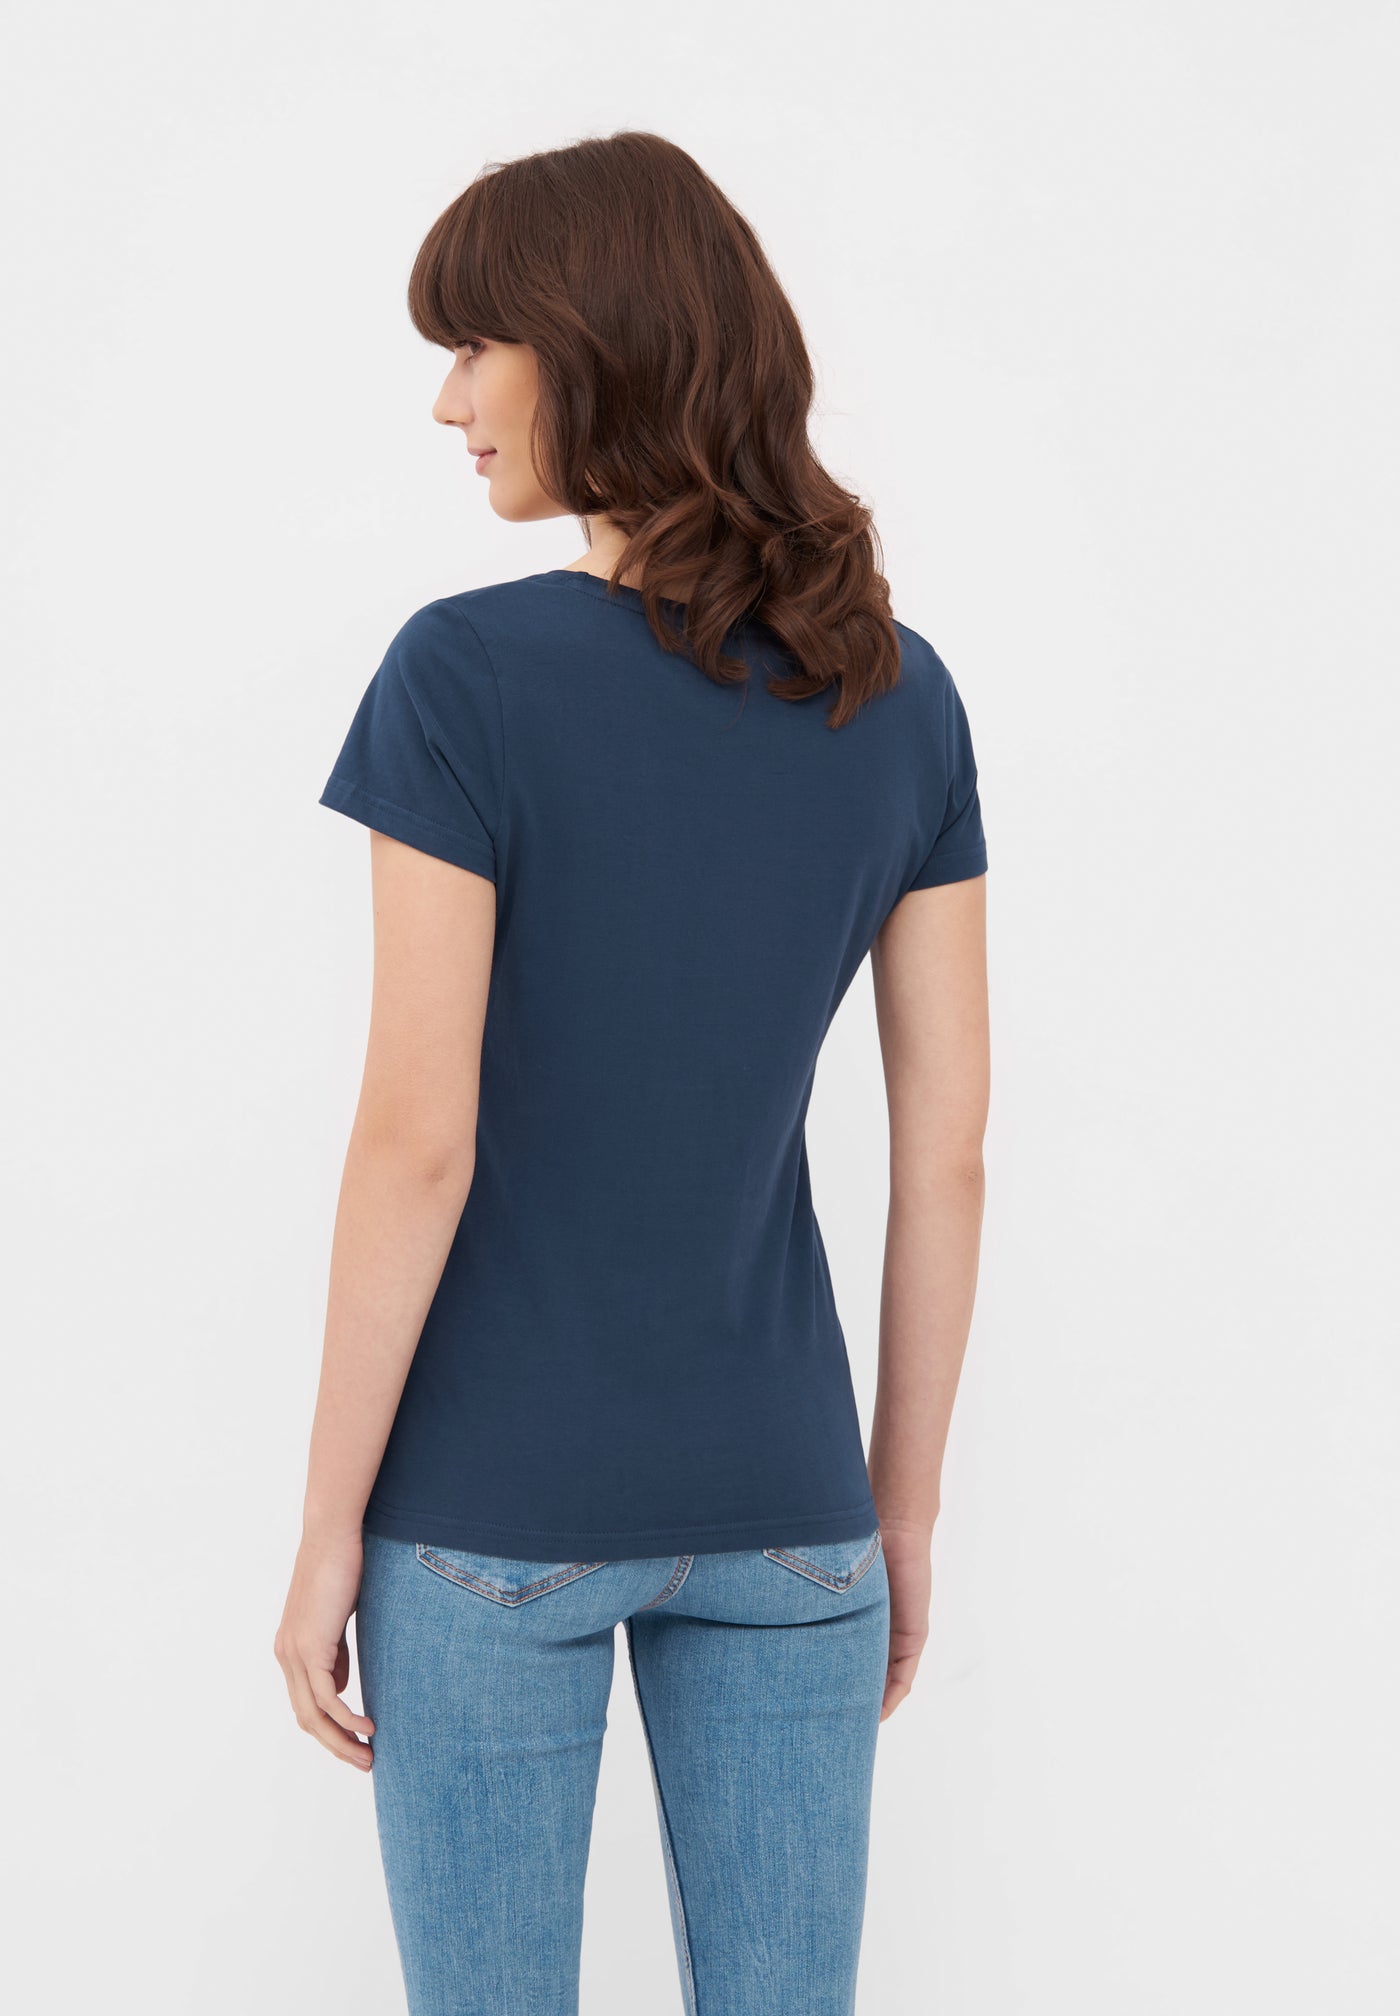 MBRC WOMEN SUSTAINABLE BLUE ROUND NECK T-SHIRT "PINK LOGO" - BACK VIEW